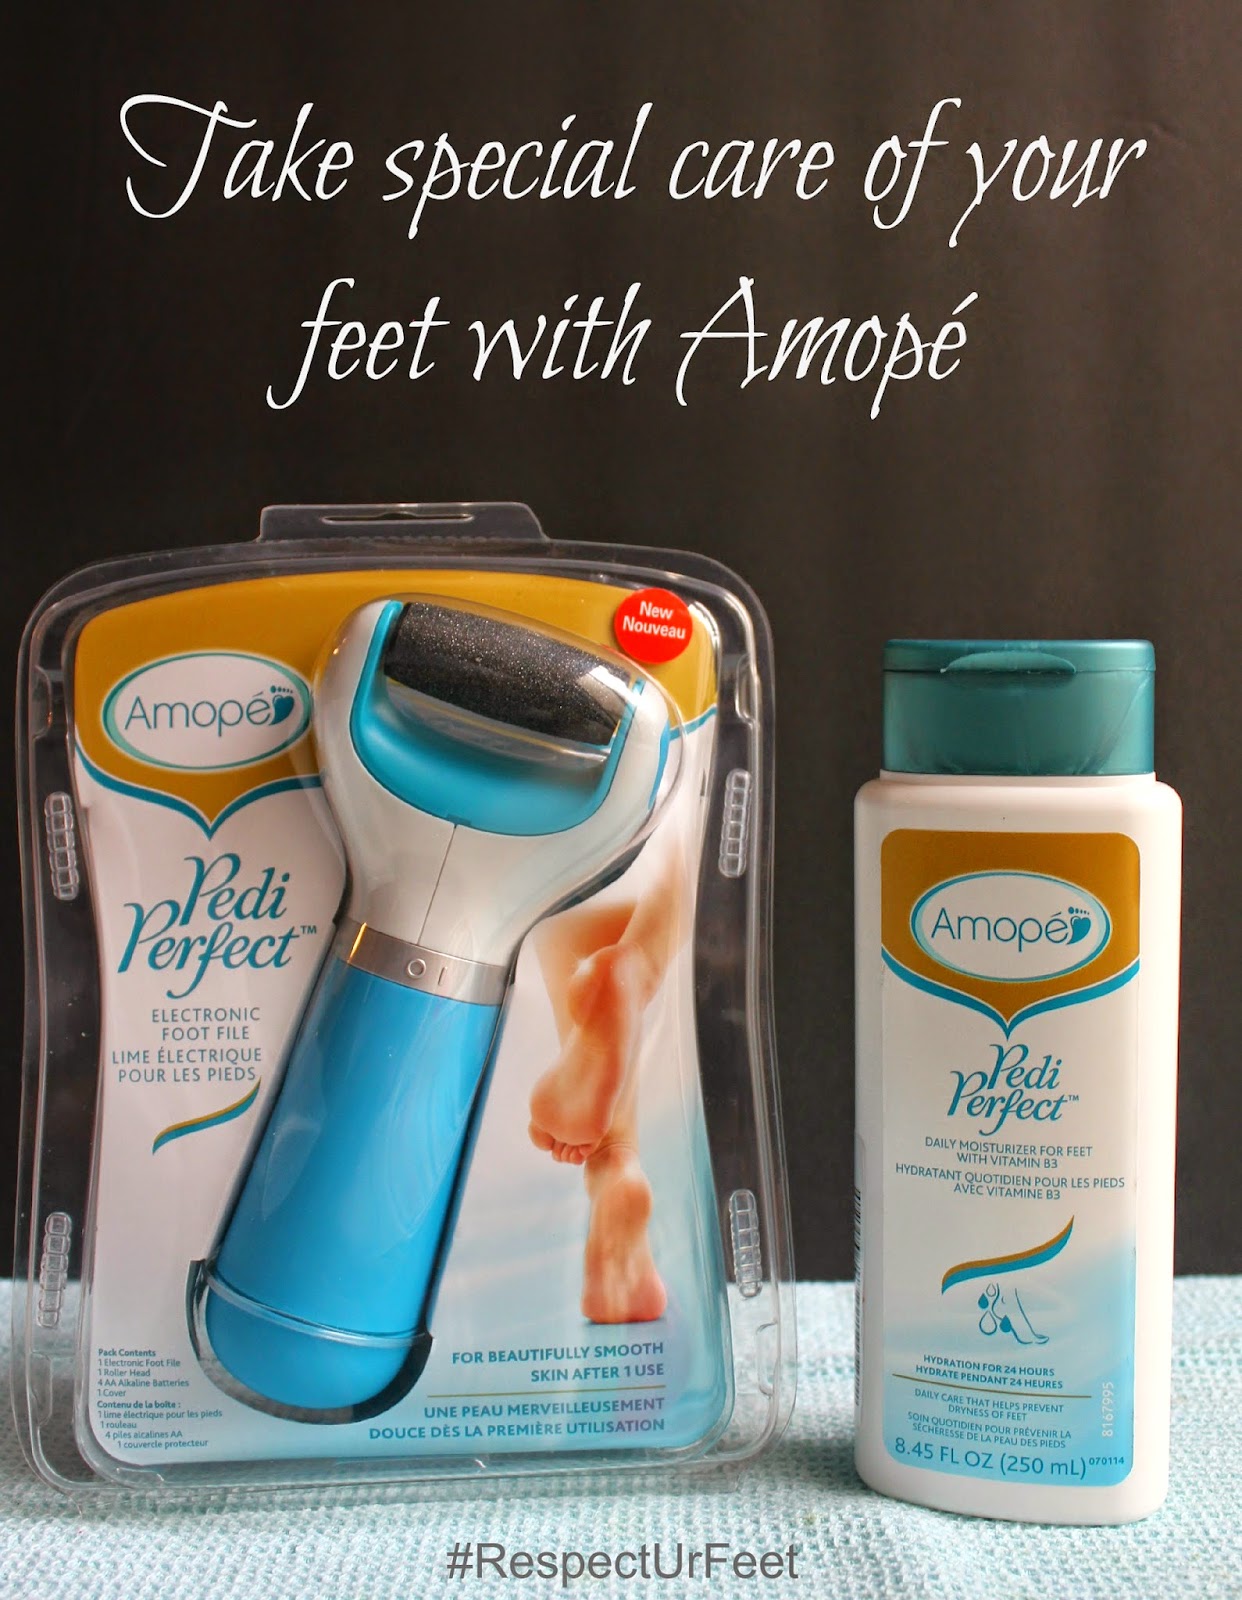 Take special care of your feet with Amopé products available at Target! #RespectUrFeet #shop